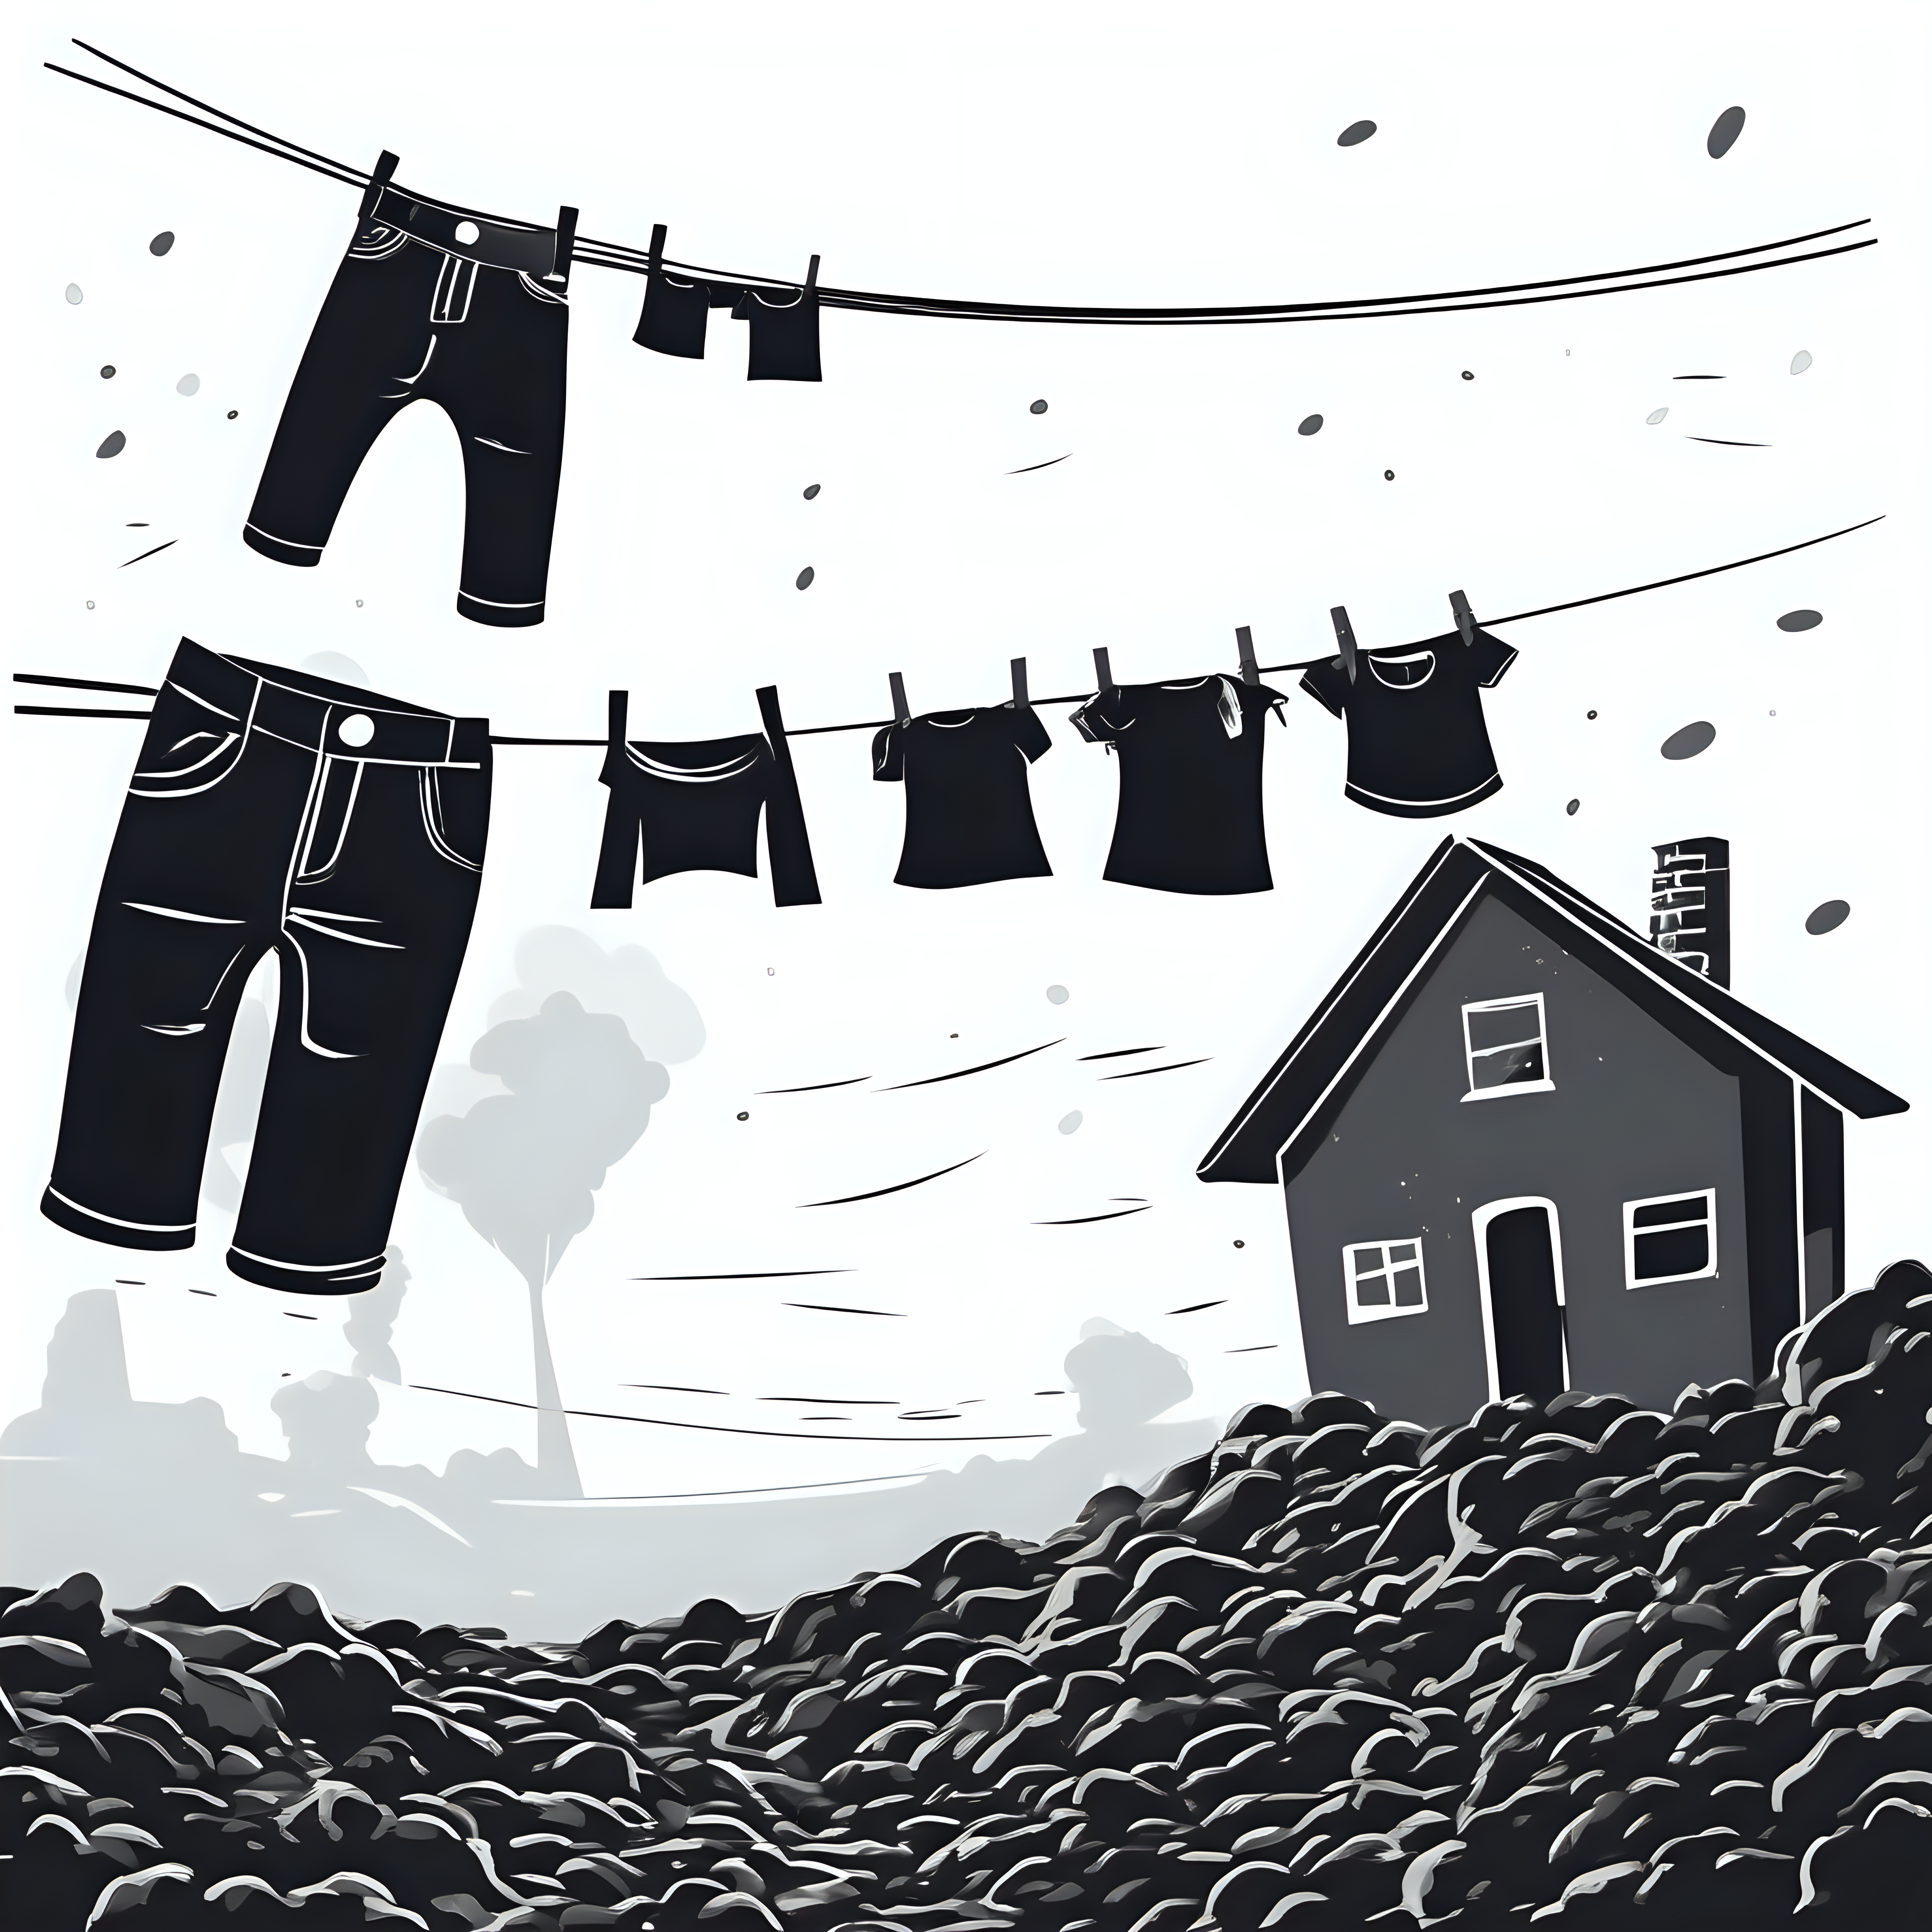 Coal dust that lifts over a clothesline with